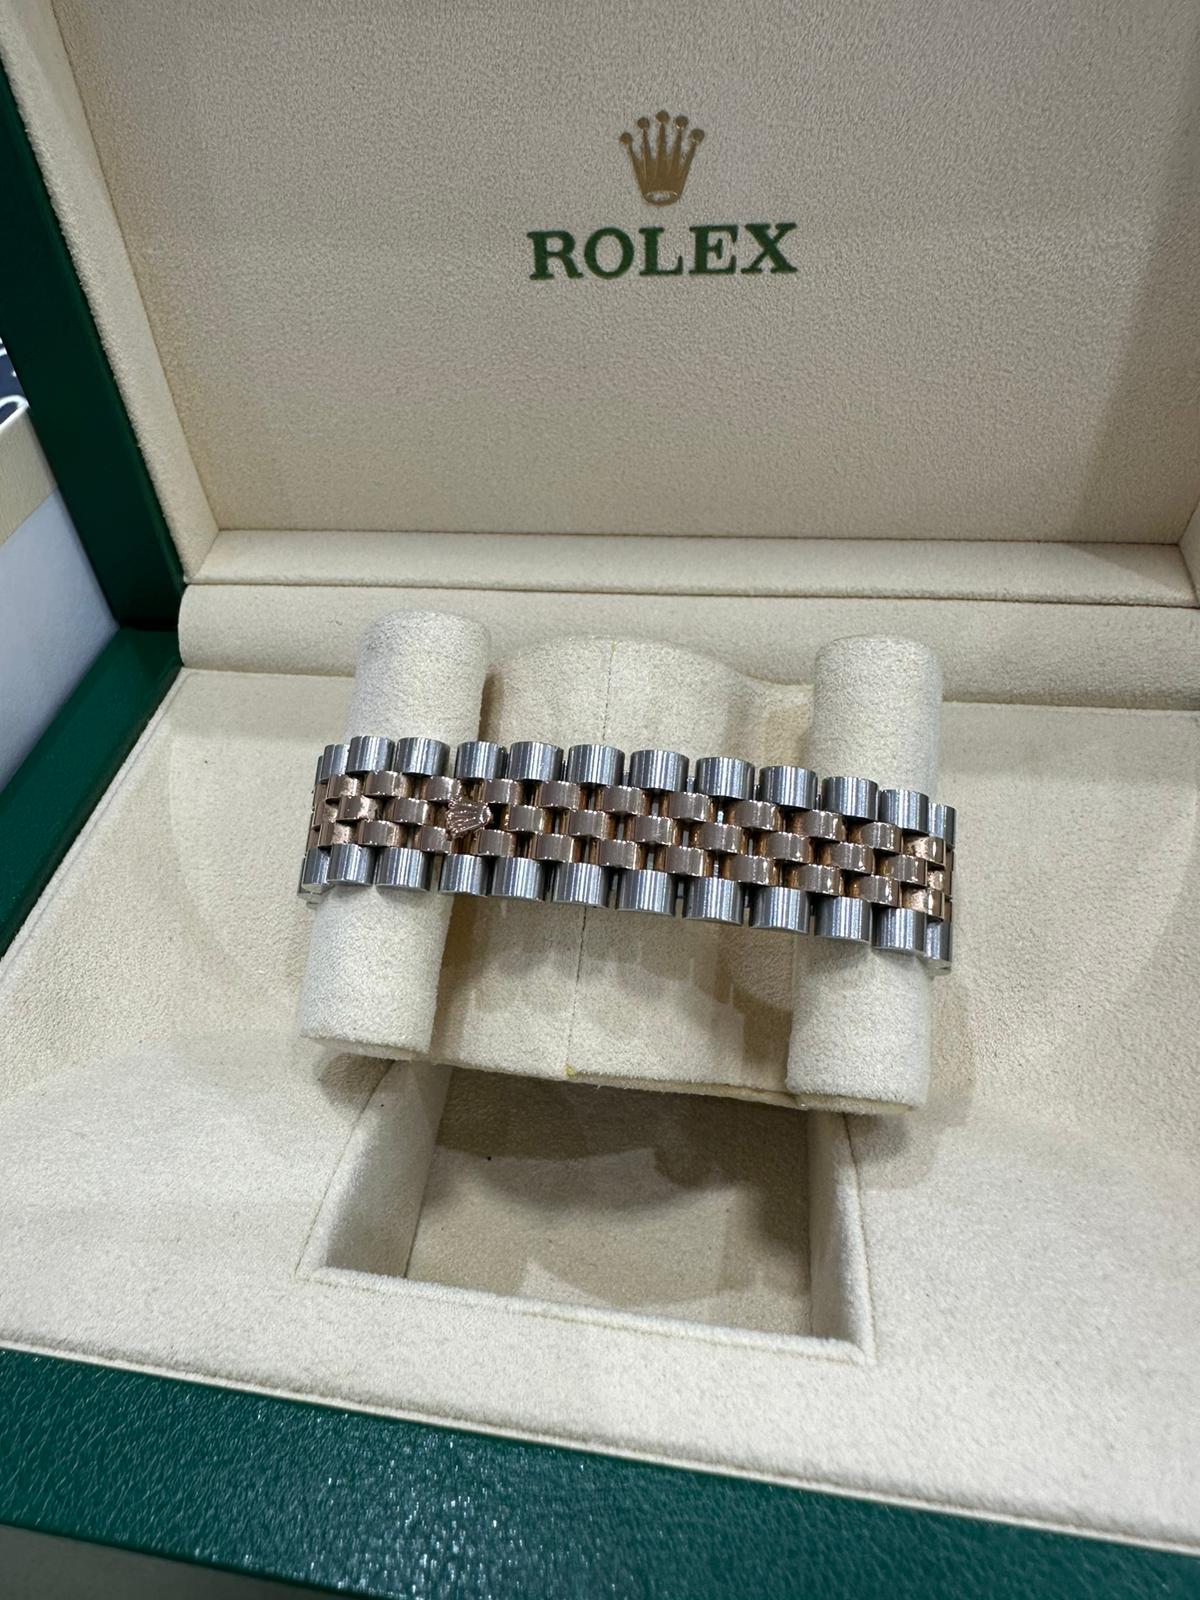 Rolex Datejust 36mm steel and rose gold concealed - Image 10 of 11